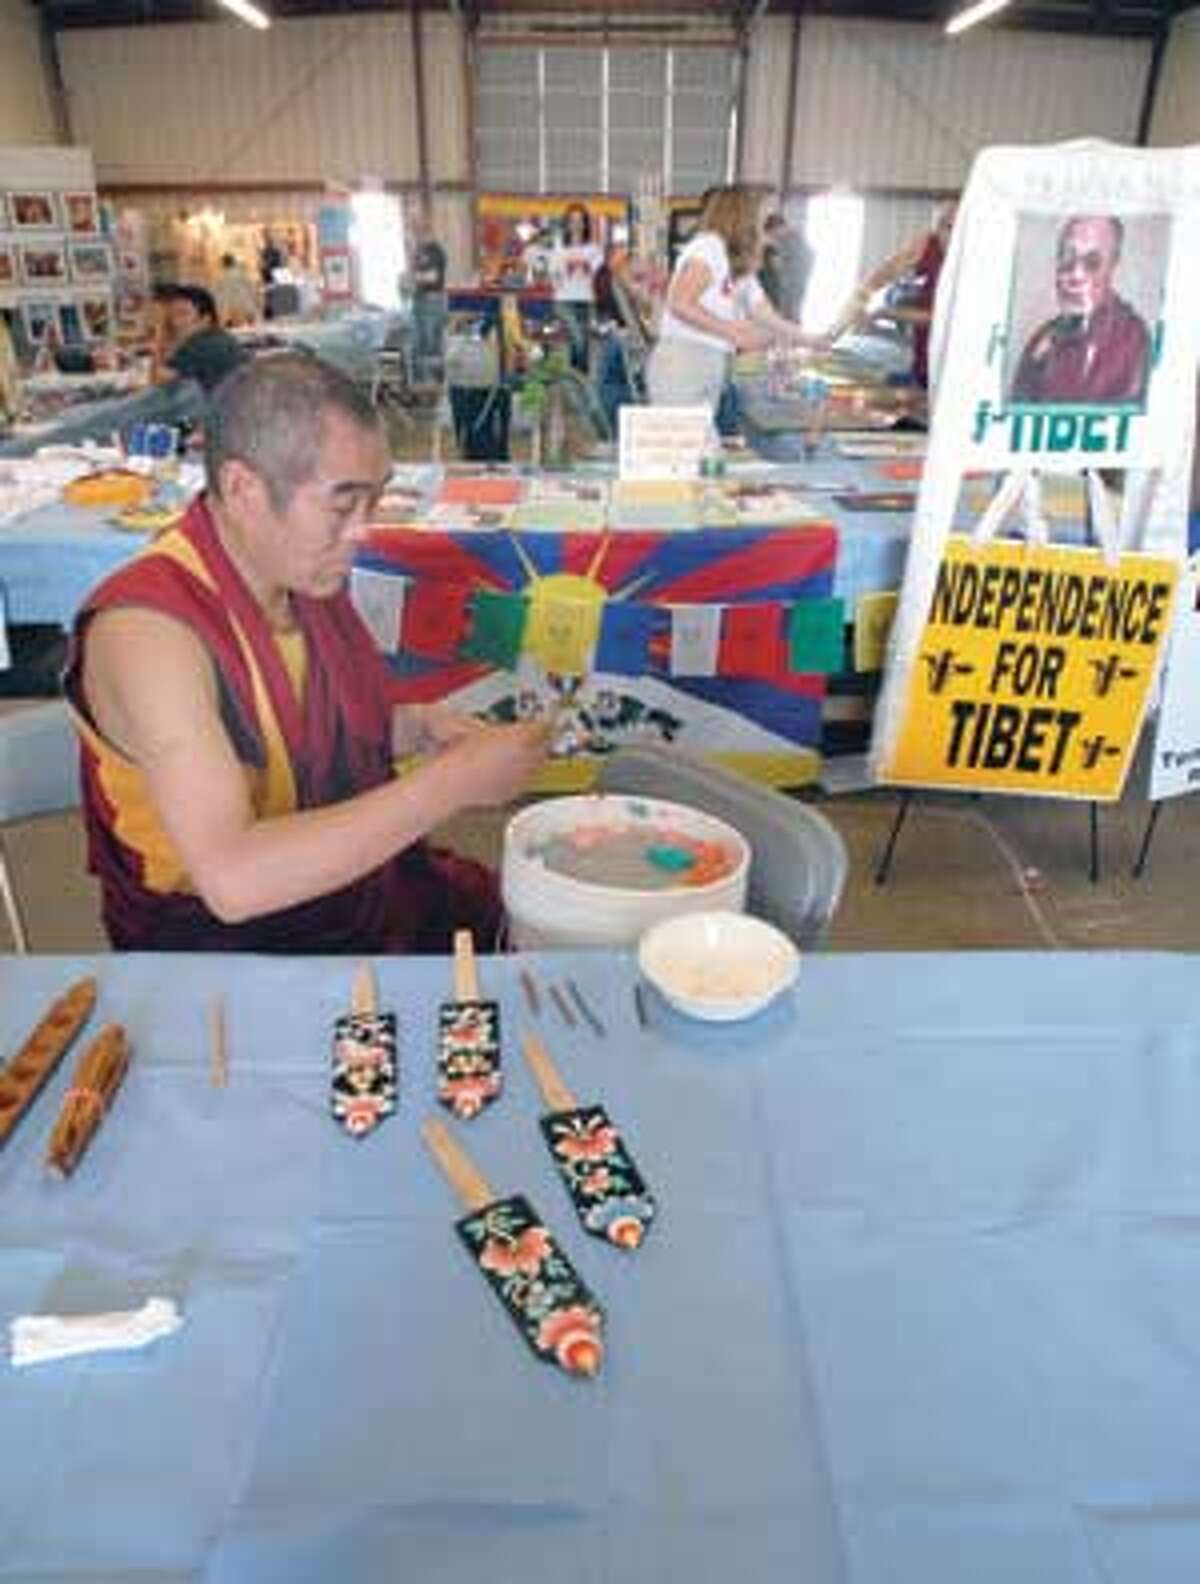 Dhonden Norbu of the Gyudmed Monastery creates butter sculptures at the festival.